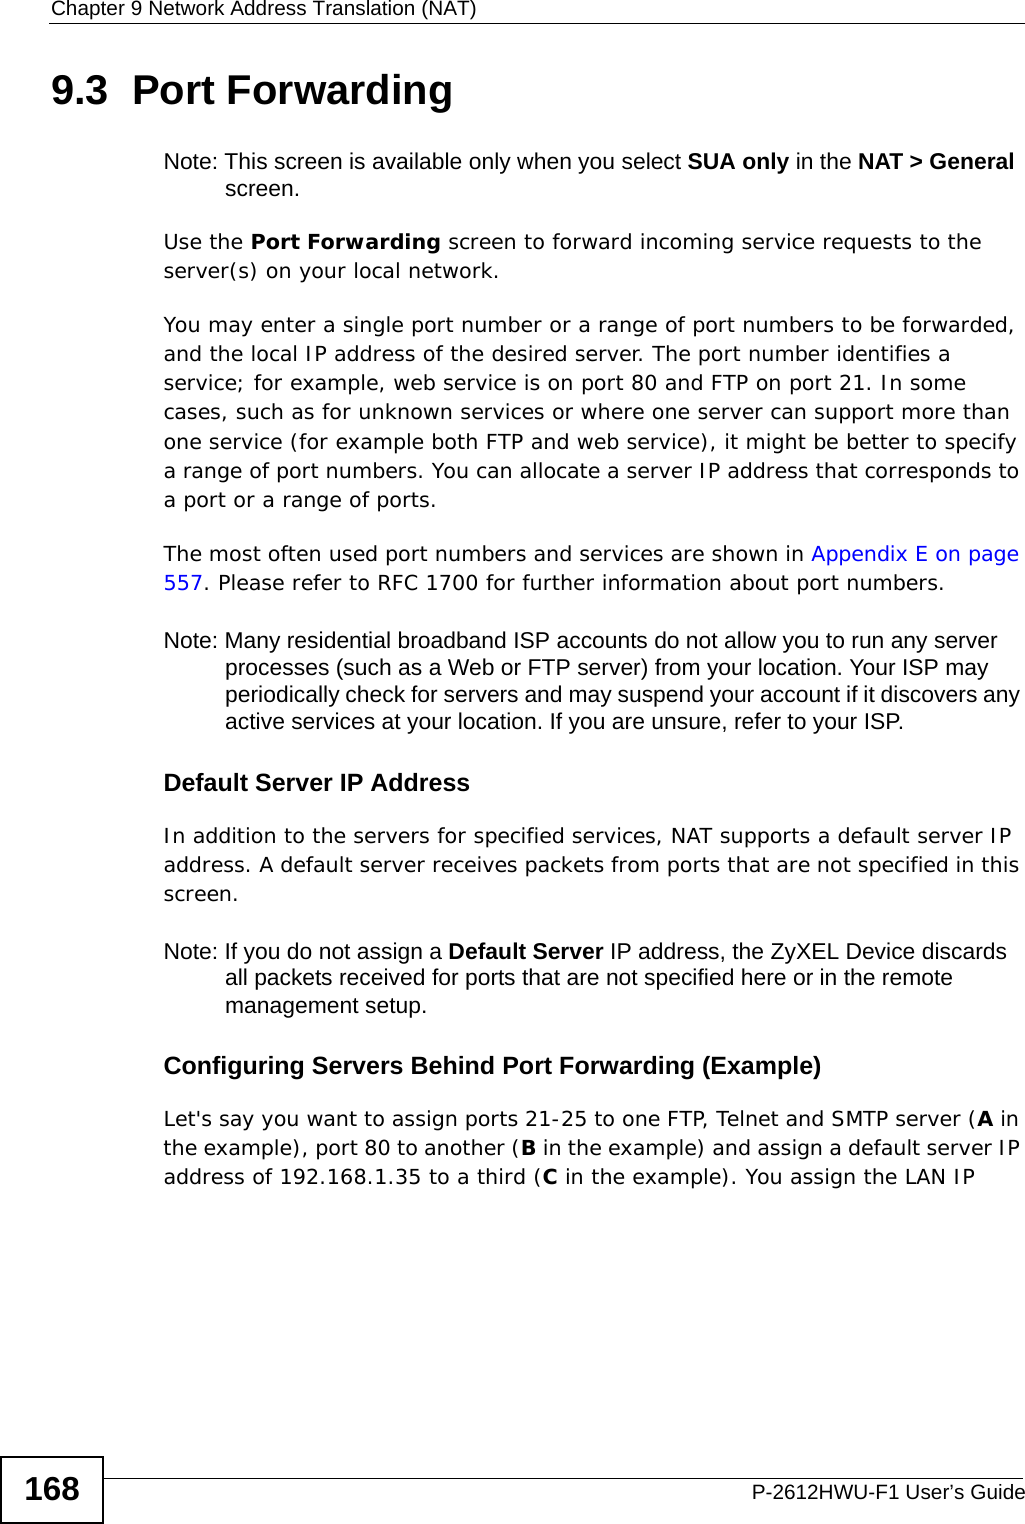 Chapter 9 Network Address Translation (NAT)P-2612HWU-F1 User’s Guide1689.3  Port Forwarding  Note: This screen is available only when you select SUA only in the NAT &gt; General screen.Use the Port Forwarding screen to forward incoming service requests to the server(s) on your local network.You may enter a single port number or a range of port numbers to be forwarded, and the local IP address of the desired server. The port number identifies a service; for example, web service is on port 80 and FTP on port 21. In some cases, such as for unknown services or where one server can support more than one service (for example both FTP and web service), it might be better to specify a range of port numbers. You can allocate a server IP address that corresponds to a port or a range of ports.The most often used port numbers and services are shown in Appendix E on page 557. Please refer to RFC 1700 for further information about port numbers. Note: Many residential broadband ISP accounts do not allow you to run any server processes (such as a Web or FTP server) from your location. Your ISP may periodically check for servers and may suspend your account if it discovers any active services at your location. If you are unsure, refer to your ISP.Default Server IP AddressIn addition to the servers for specified services, NAT supports a default server IP address. A default server receives packets from ports that are not specified in this screen.Note: If you do not assign a Default Server IP address, the ZyXEL Device discards all packets received for ports that are not specified here or in the remote management setup.Configuring Servers Behind Port Forwarding (Example)Let&apos;s say you want to assign ports 21-25 to one FTP, Telnet and SMTP server (A in the example), port 80 to another (B in the example) and assign a default server IP address of 192.168.1.35 to a third (C in the example). You assign the LAN IP 